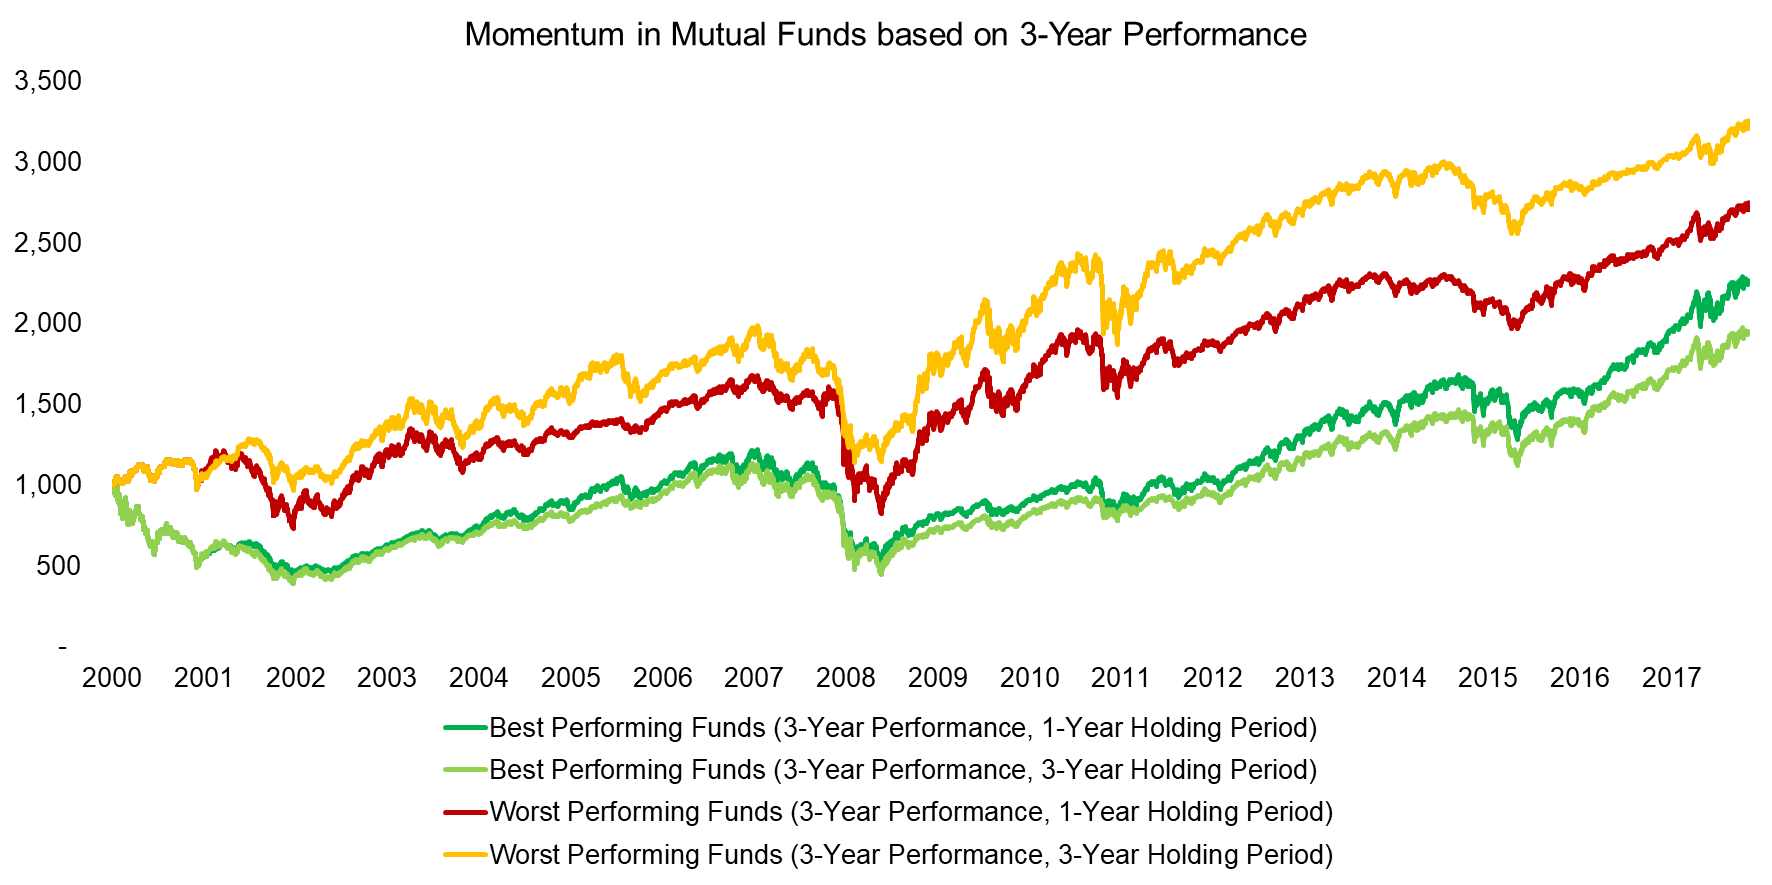 Momentum in Mutual Funds based on 3-Year Performance